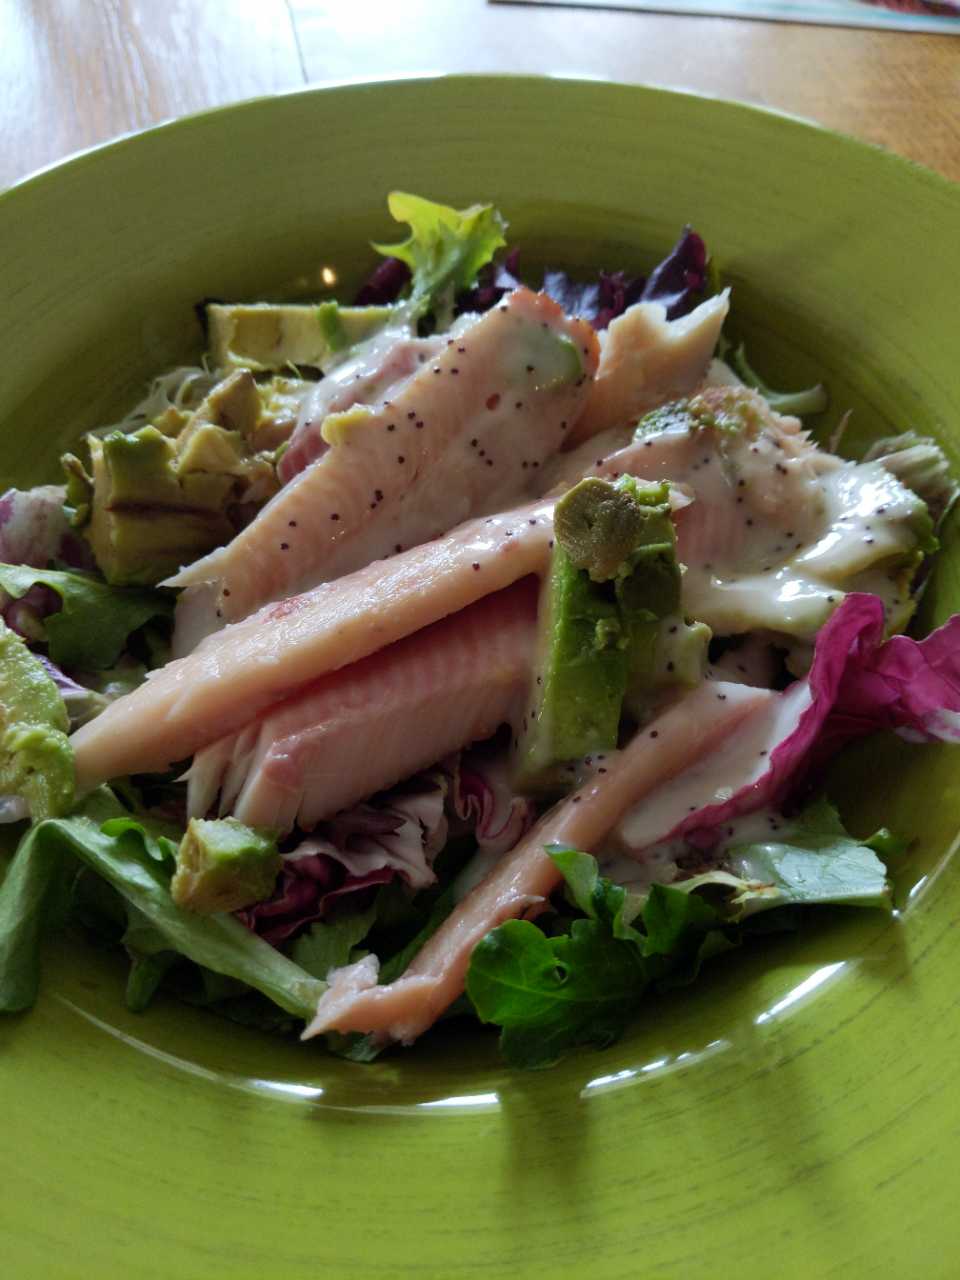 delicious-and-nutritious-Geen-salad-with-my-neighbors-fresh-smoked-trout-wh-3c6e708a-e4fa-4a39-8109-58bc77f5f3bc-post-image